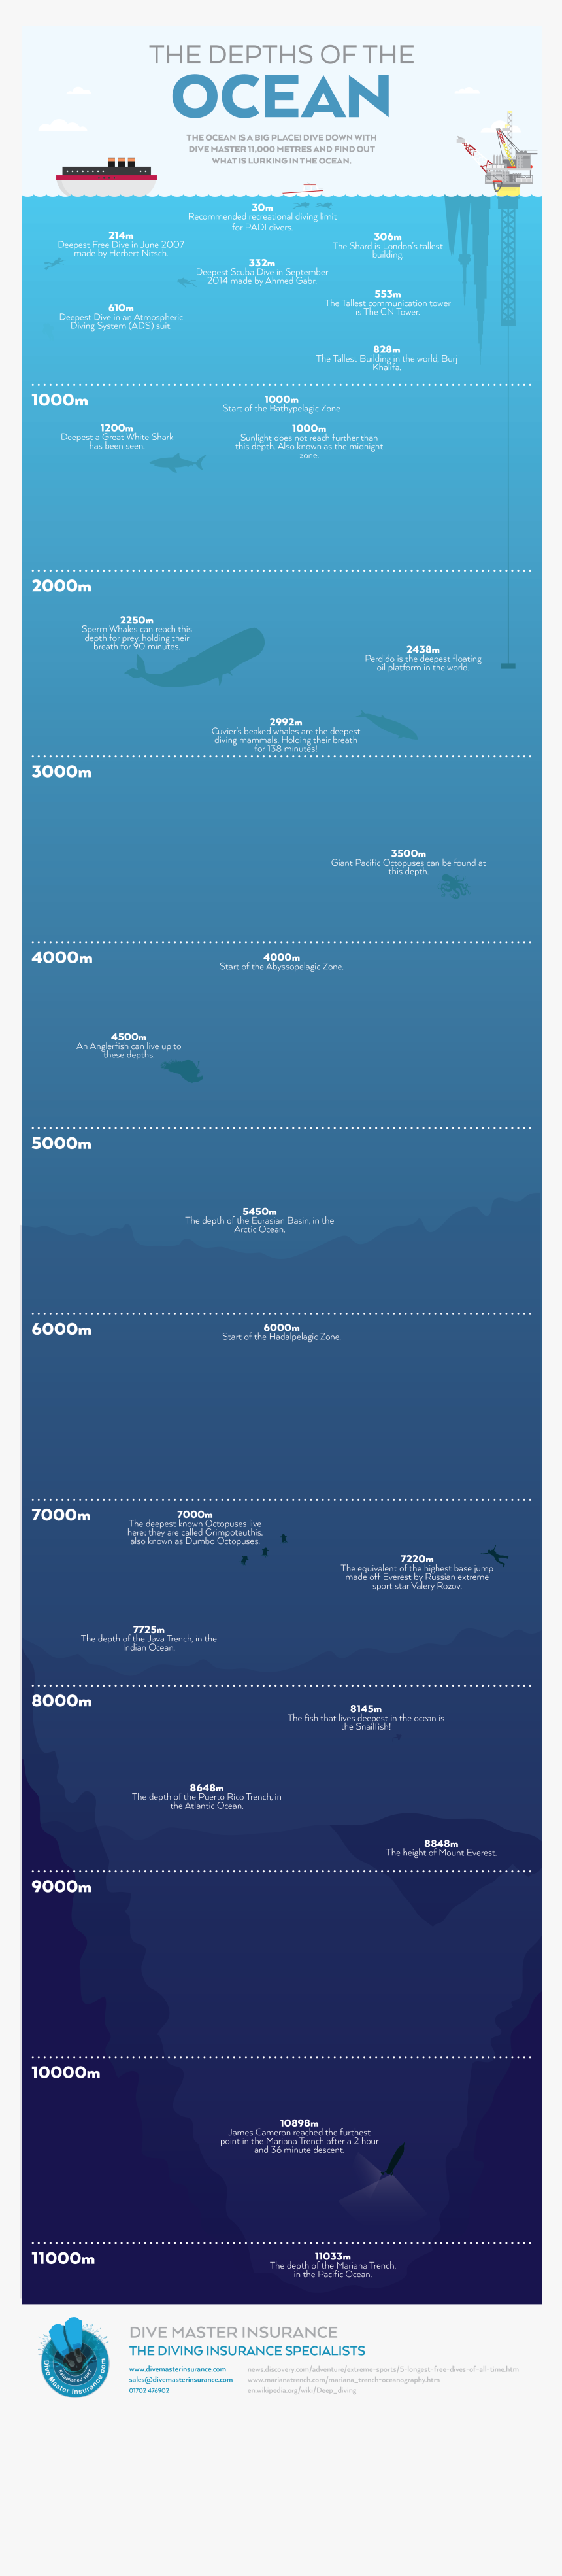 Depths Of The Ocean - Different Depths Of The Ocean, HD Png Download, Free Download